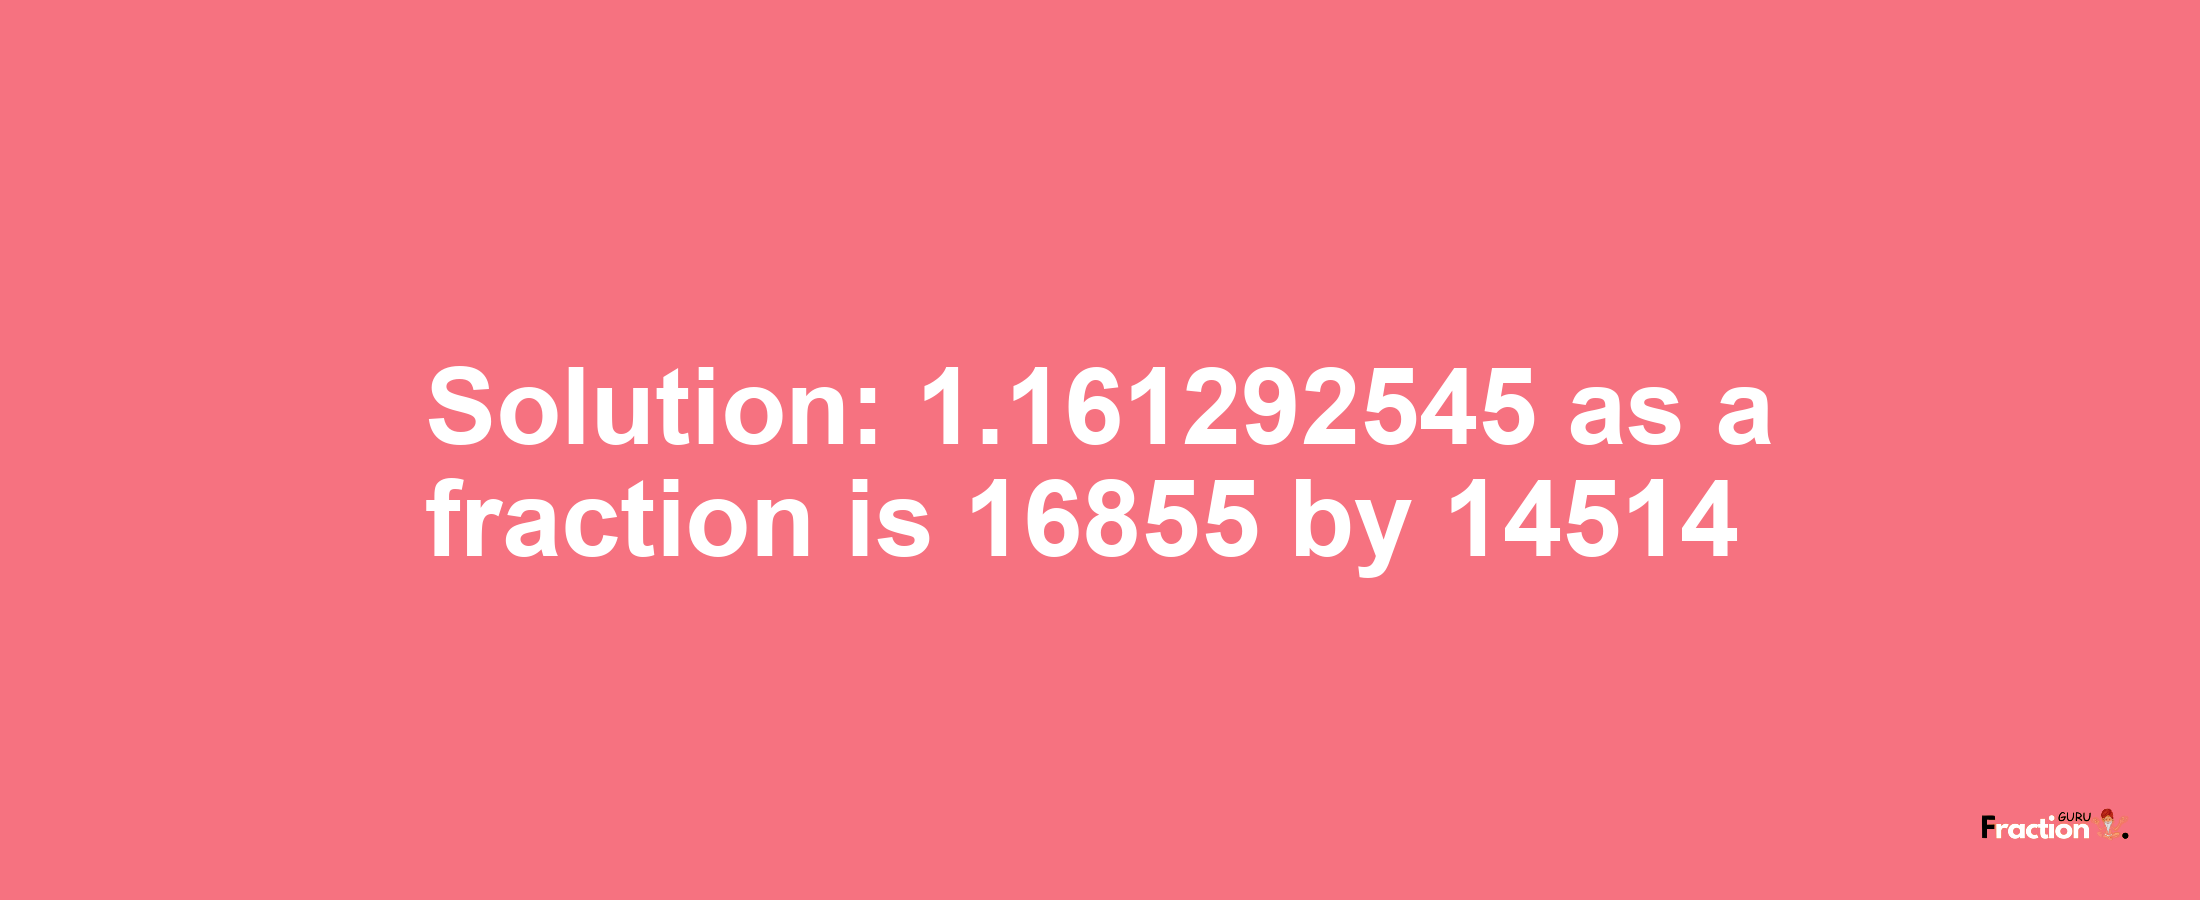 Solution:1.161292545 as a fraction is 16855/14514